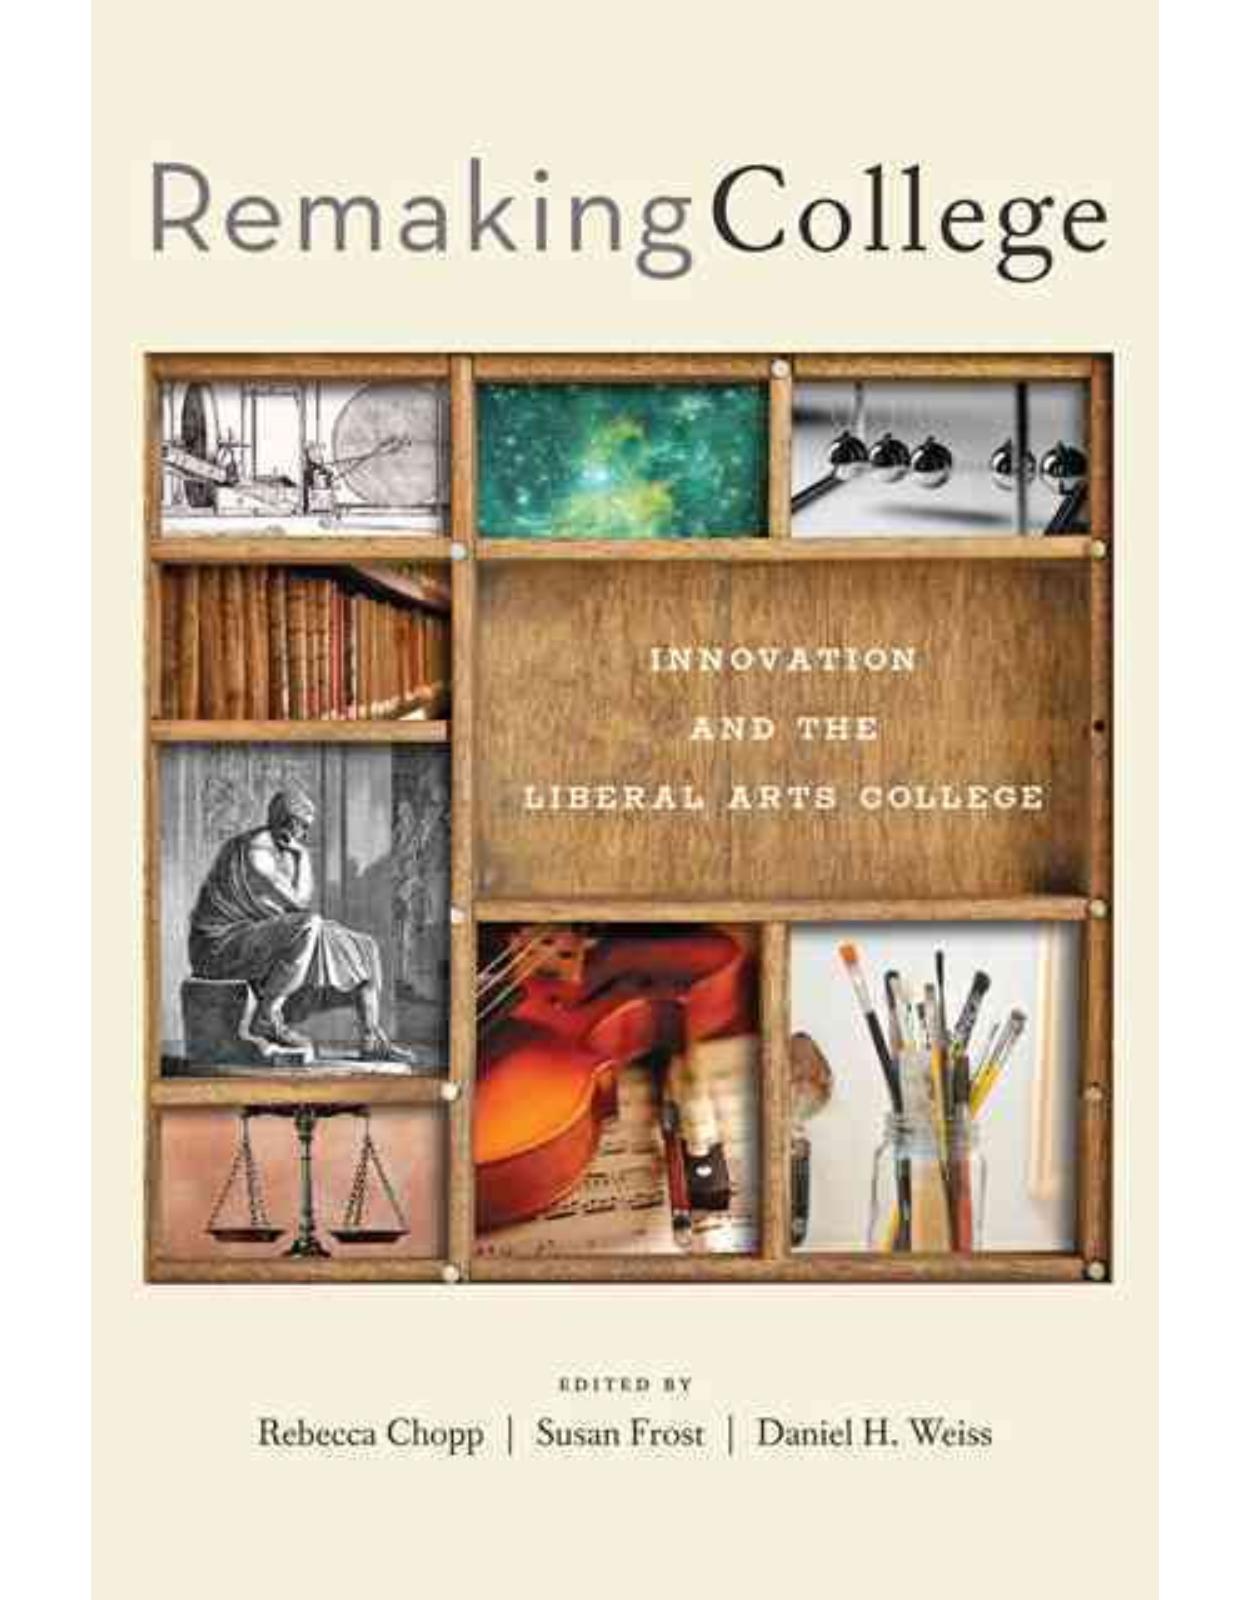 Remaking College. Innovation and the Liberal Arts College